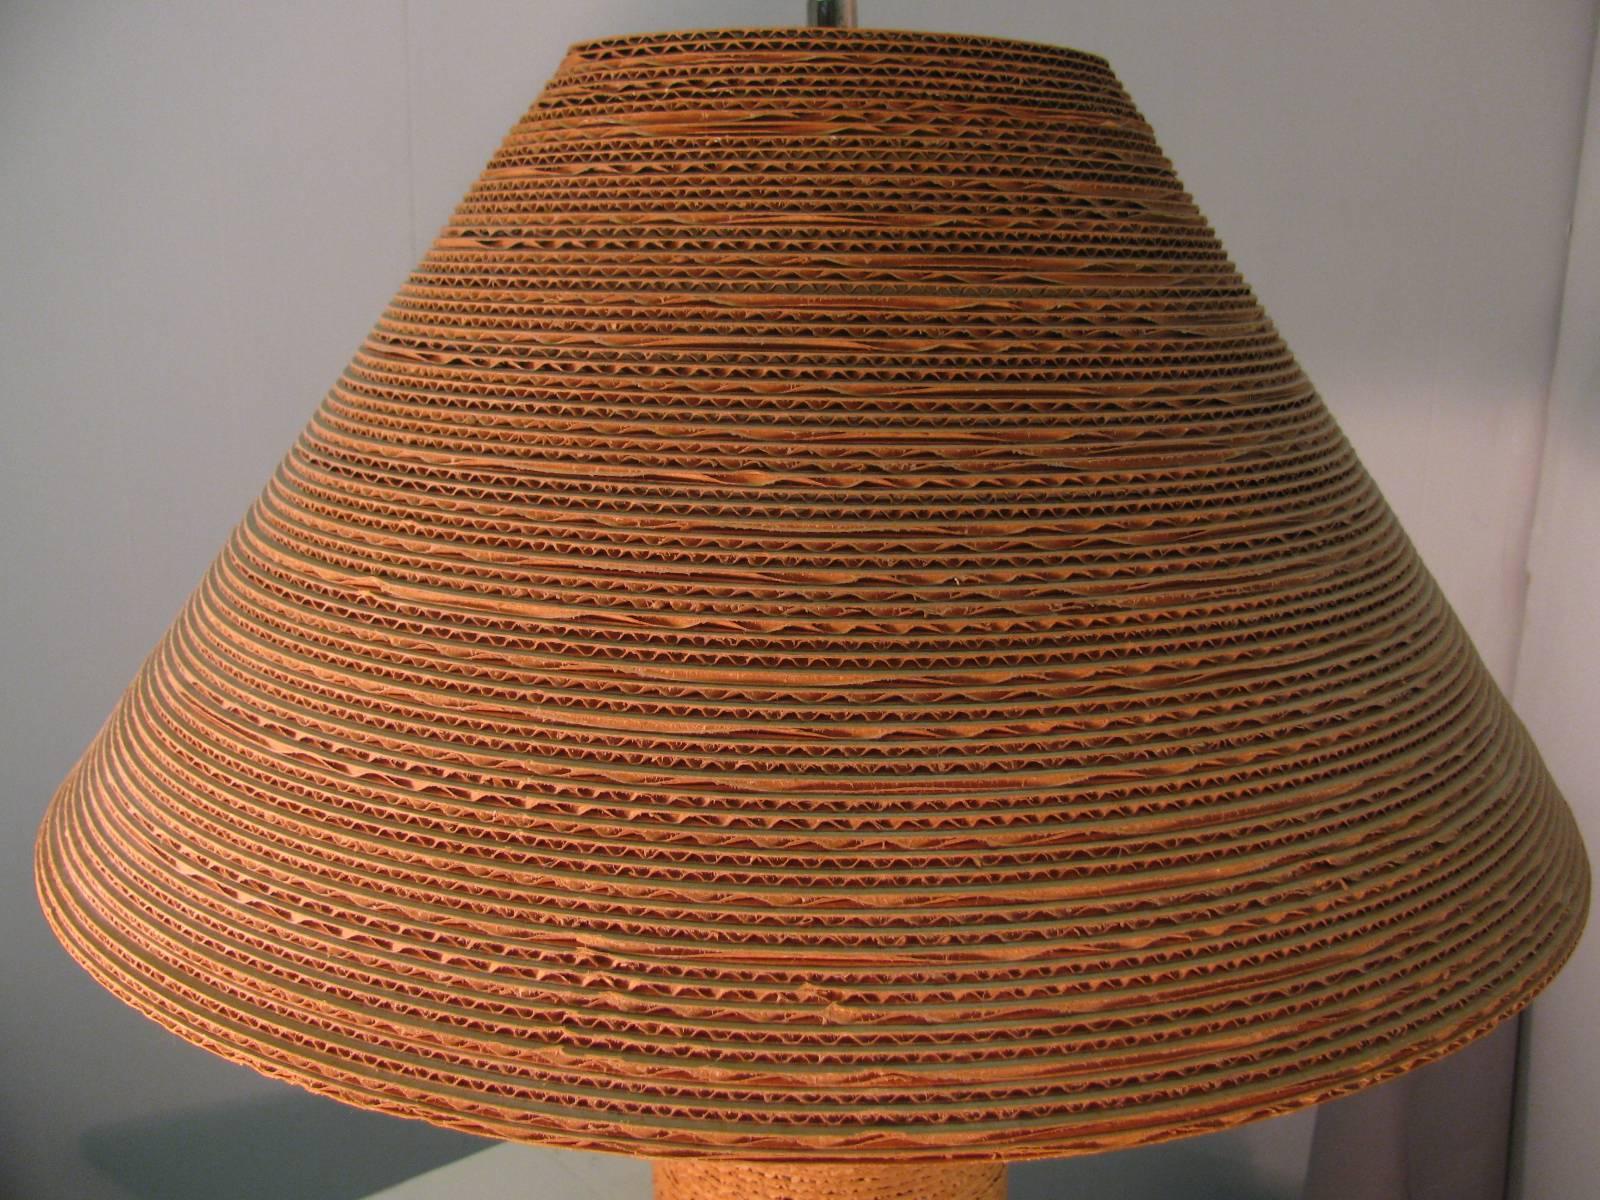 All original cardboard lamp with shade. Wood base. UL listed, 27 in. height is to the top of the shade. Lamp base diameter is 5.25 in.